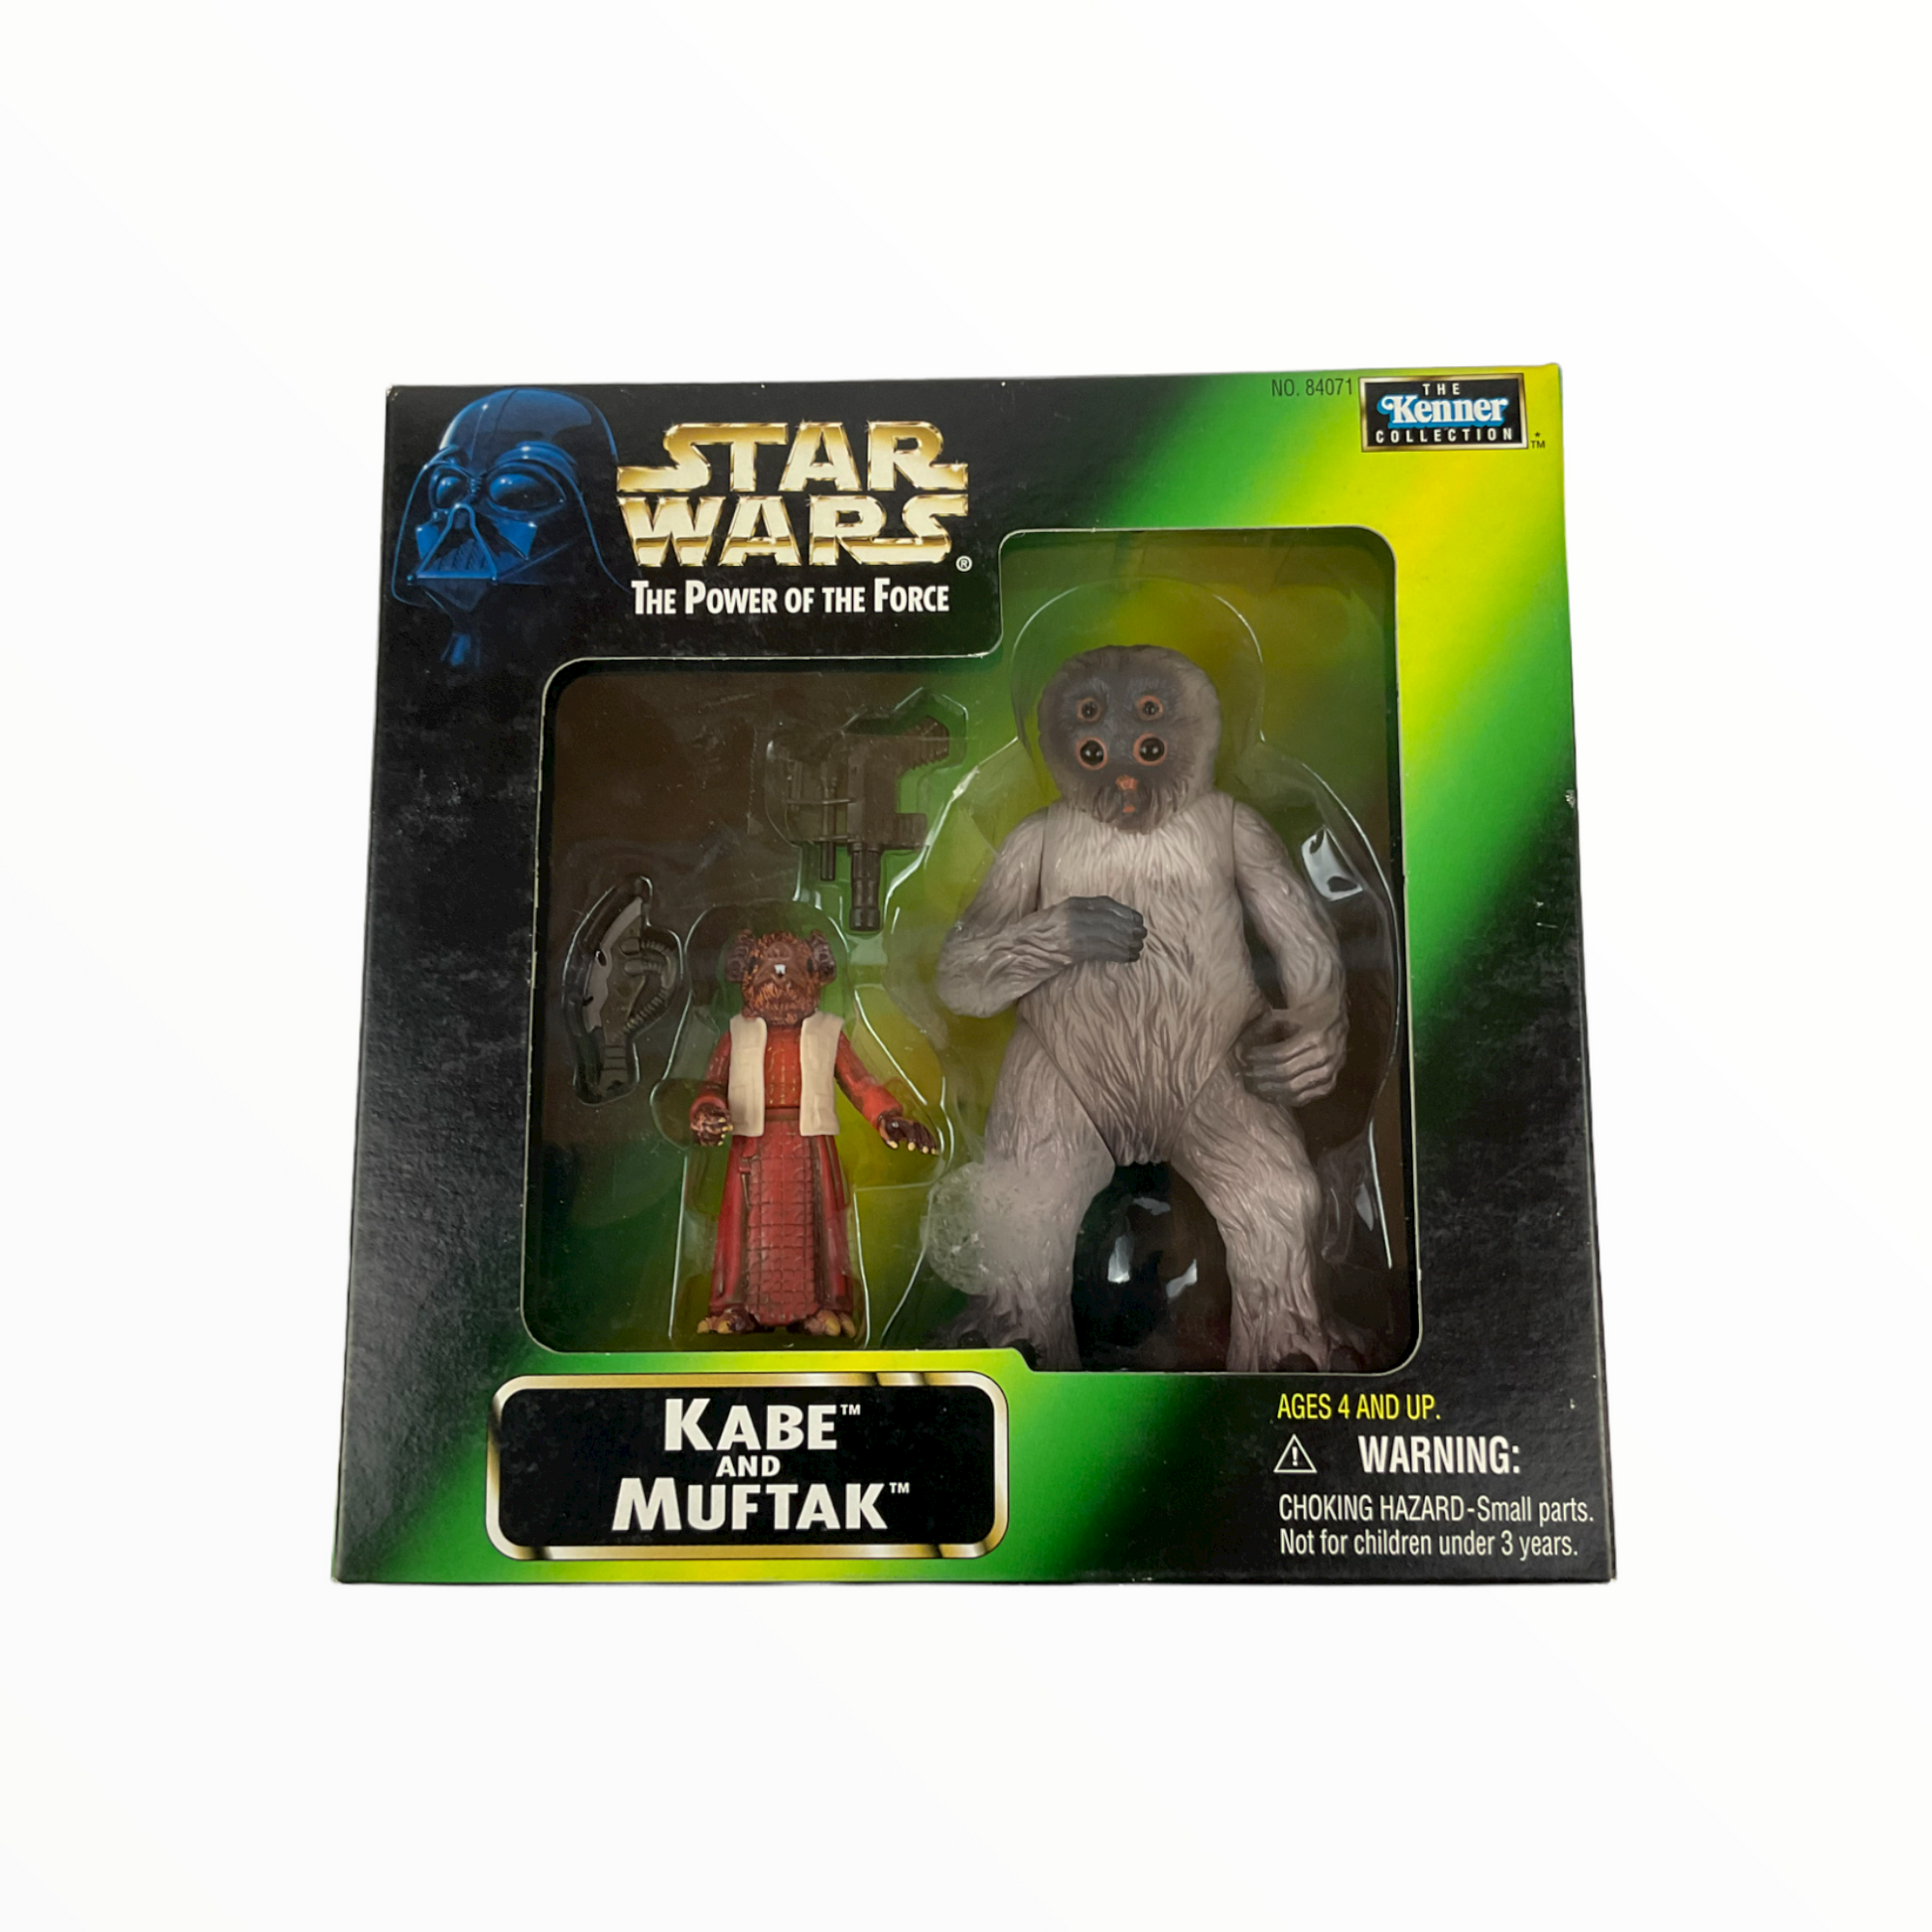 Star Wars The Power of The Force Kabe and Muftak